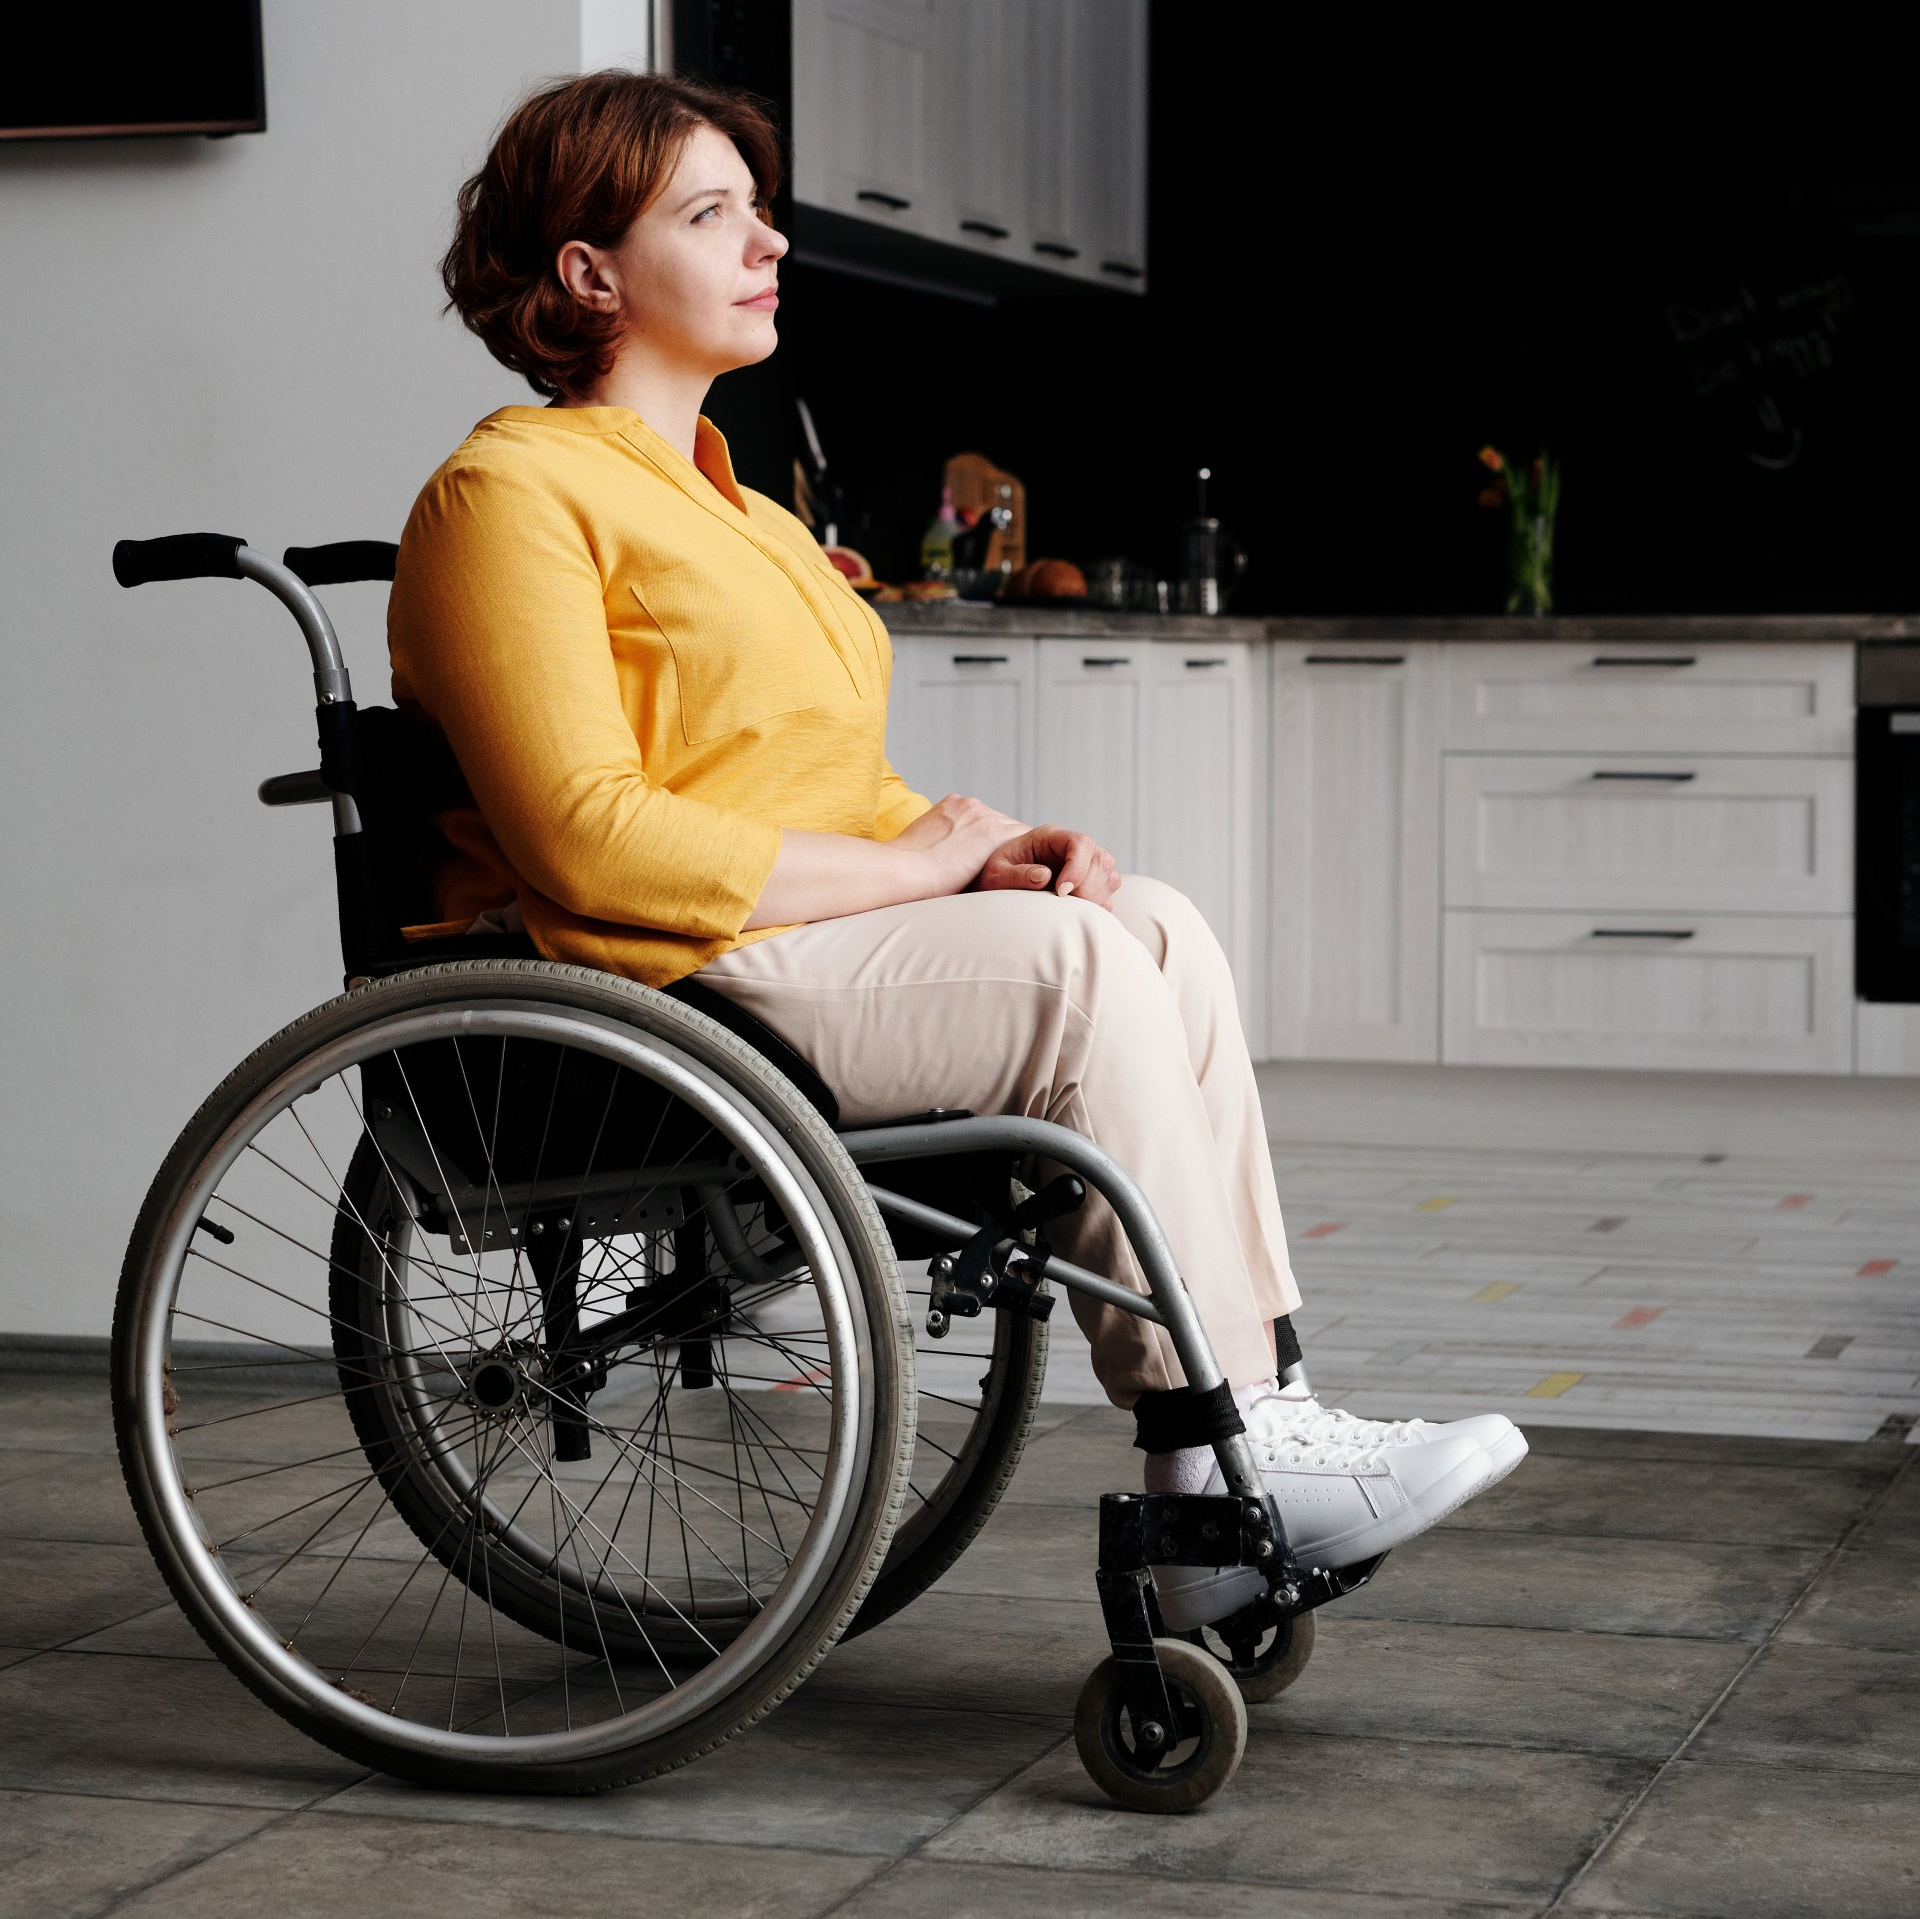 A woman in a yellow shirt is sitting in a wheelchair